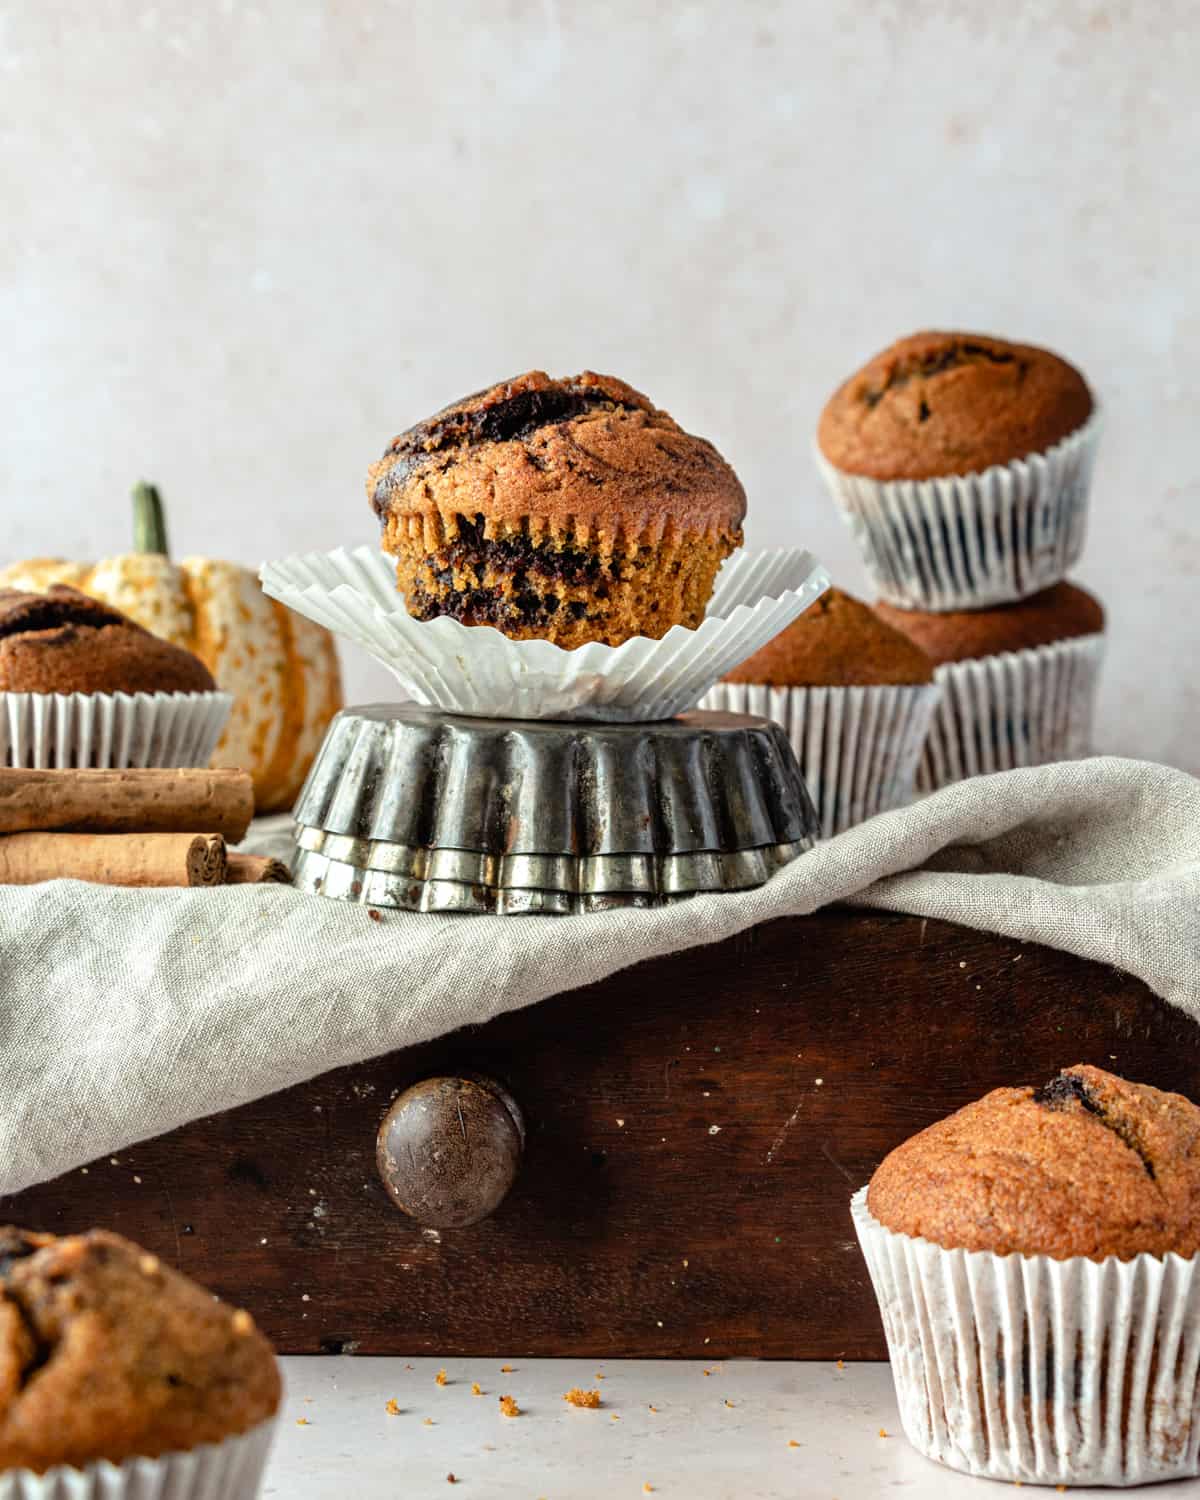 Muffins on pastry case surrounded with other muffins and a pumpkin with a grey cloth